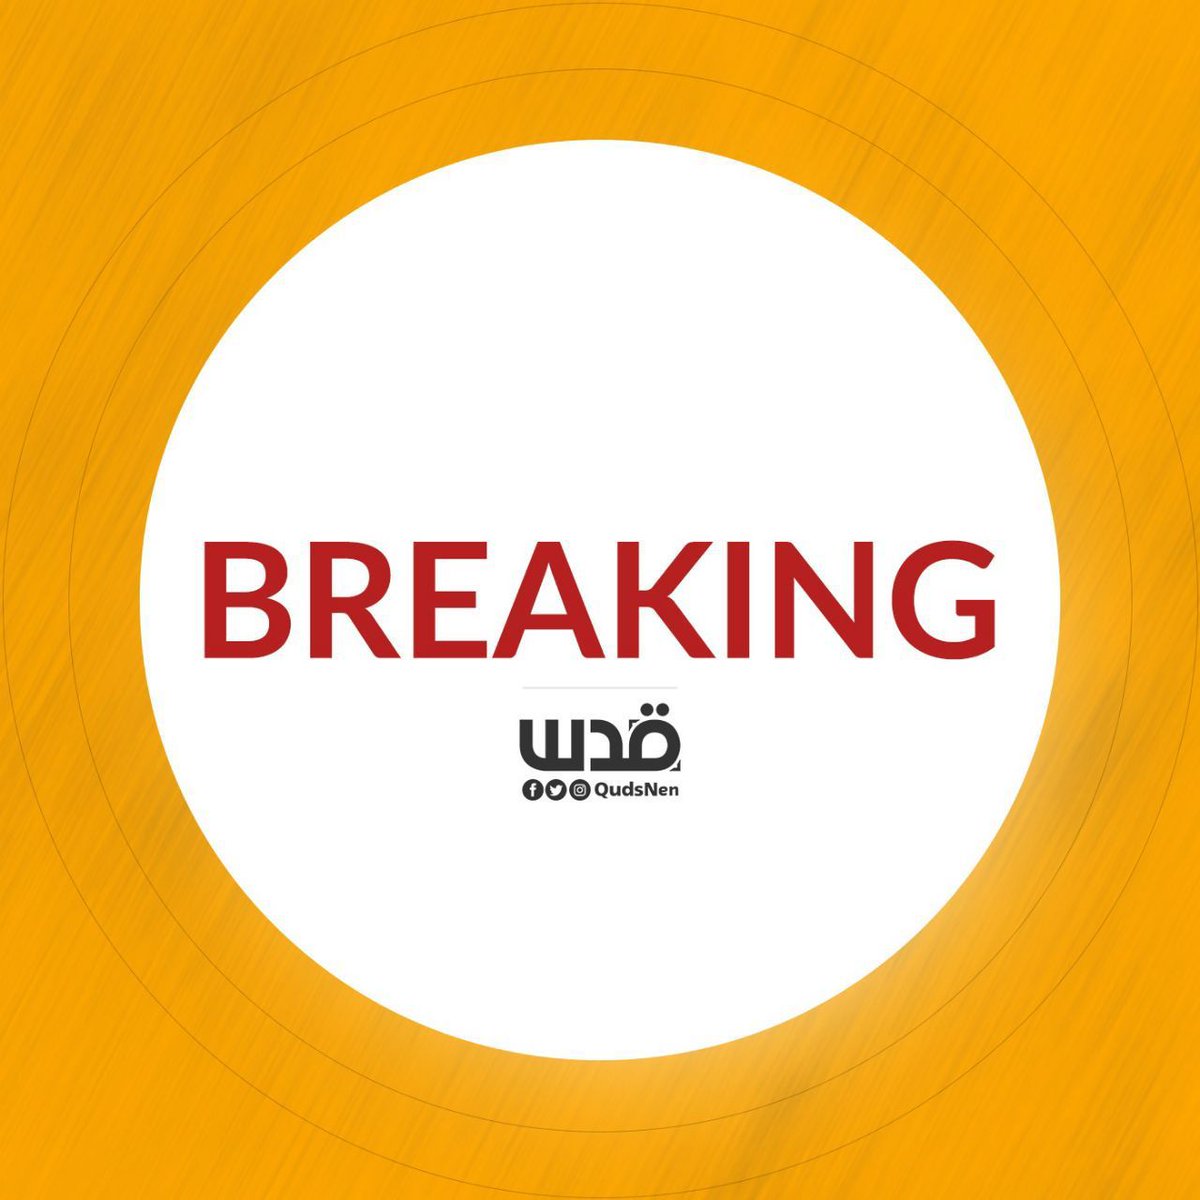 BREAKING | Director General of the Government Media in Gaza: - We have discovered two mass graves in the Nasser Medical Complex and we expect there will be more - We found in Nasser Complex corpses without heads, bodies without skins, and some of them had their organs stolen -